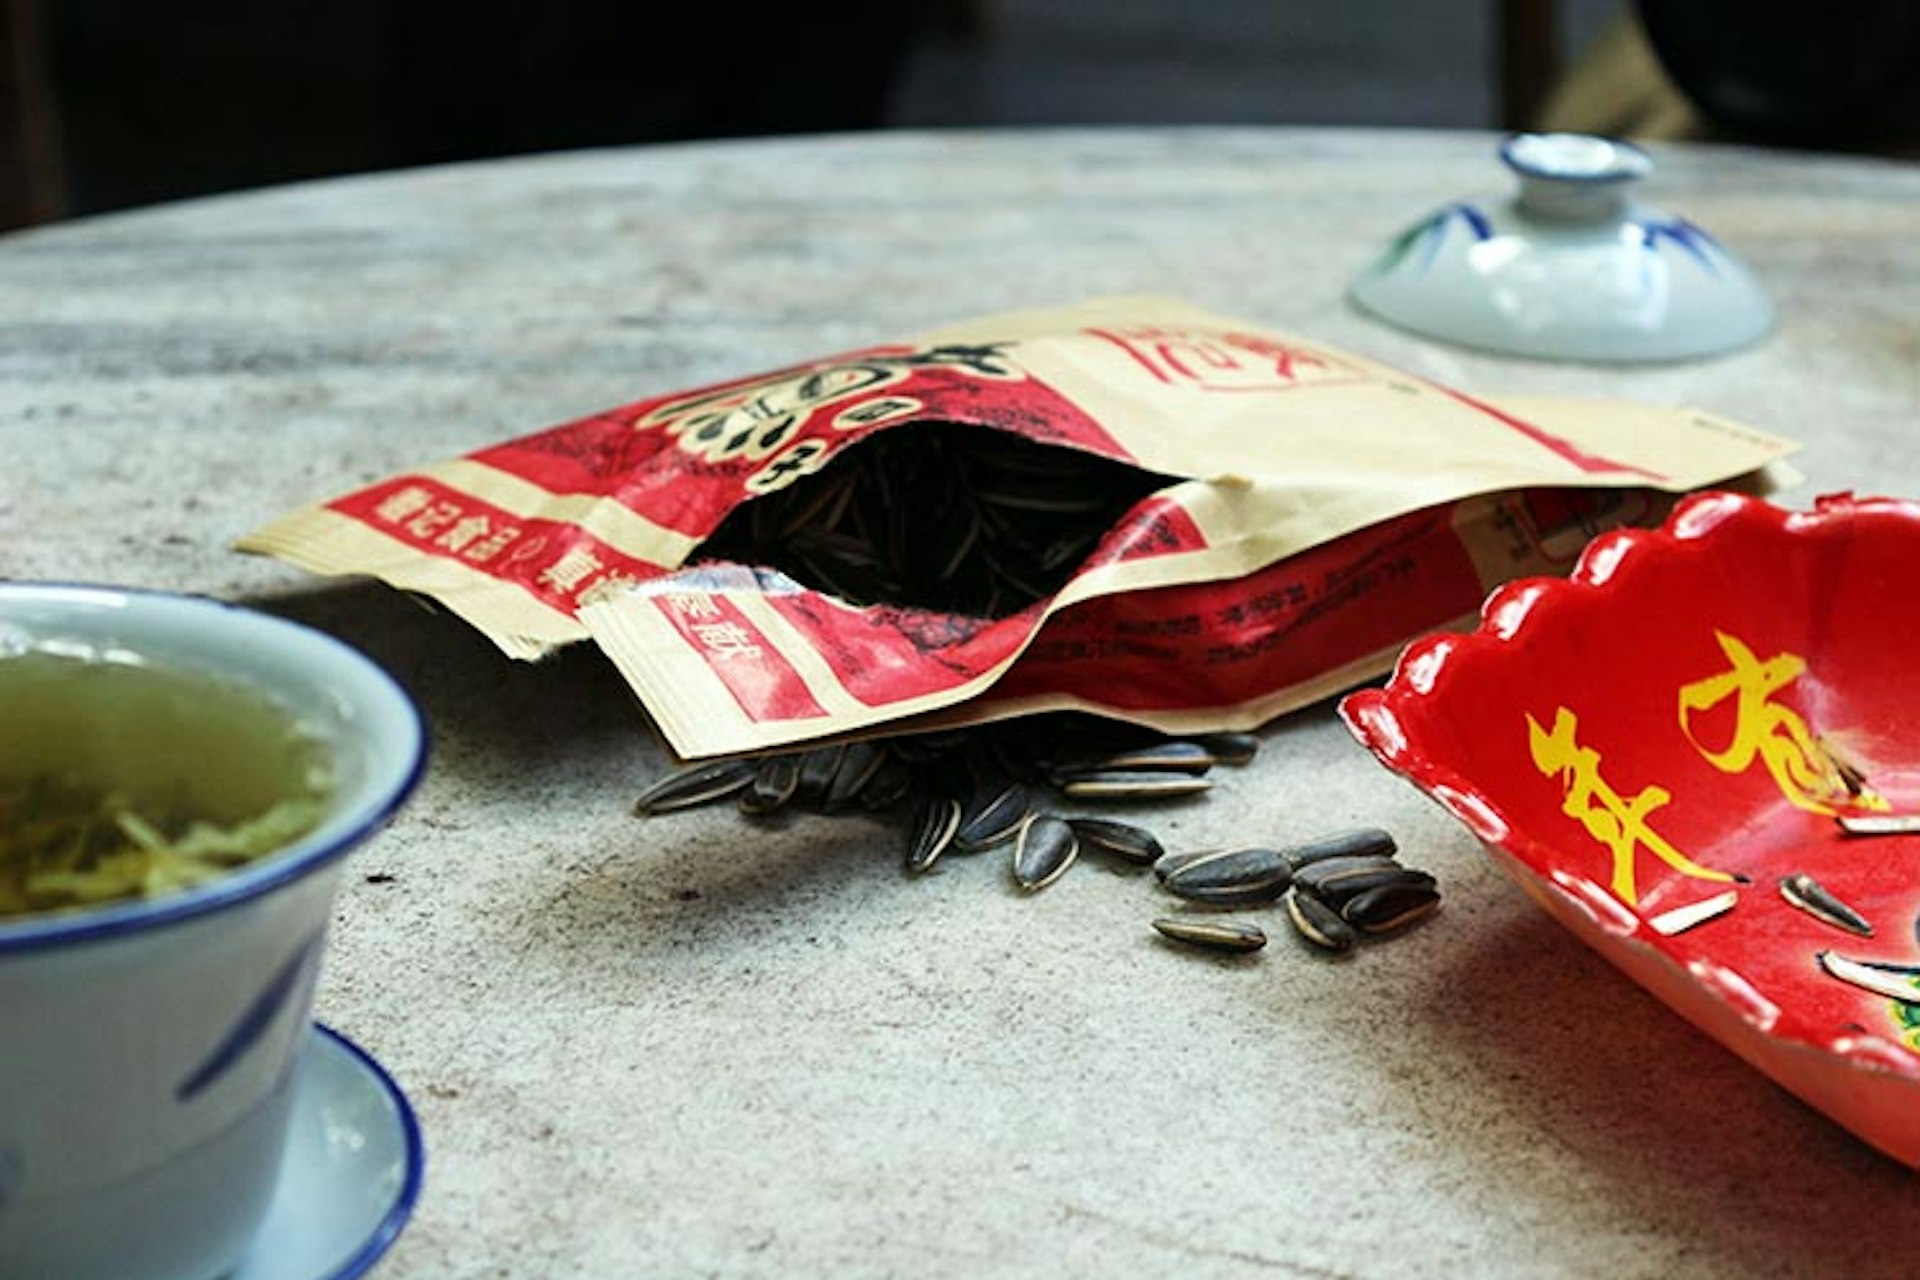 Sunflower seeds - a common teahouse snack. Image by Qin Xie / Lonely Planet